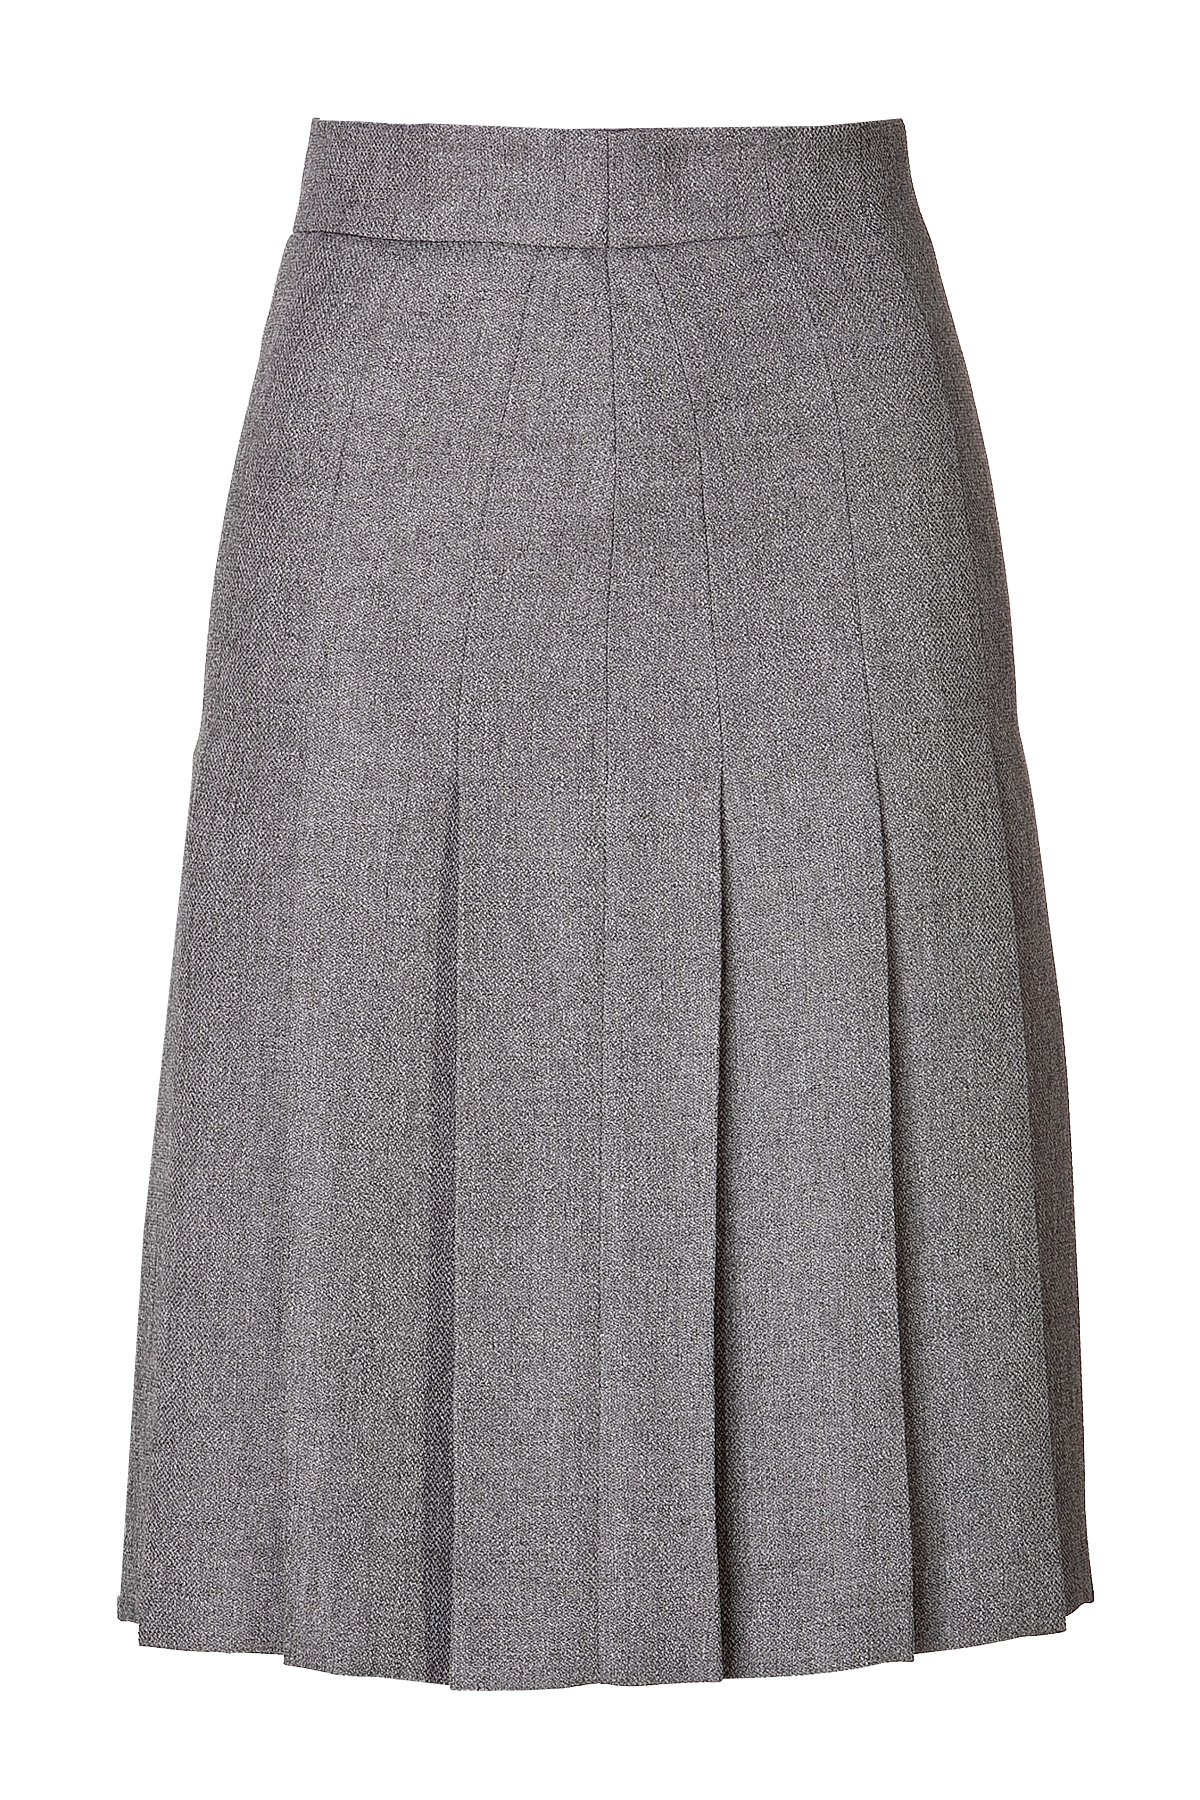 Plus Size Gray Wool Blend pleated skirt , Custom Fit, Fully Lined